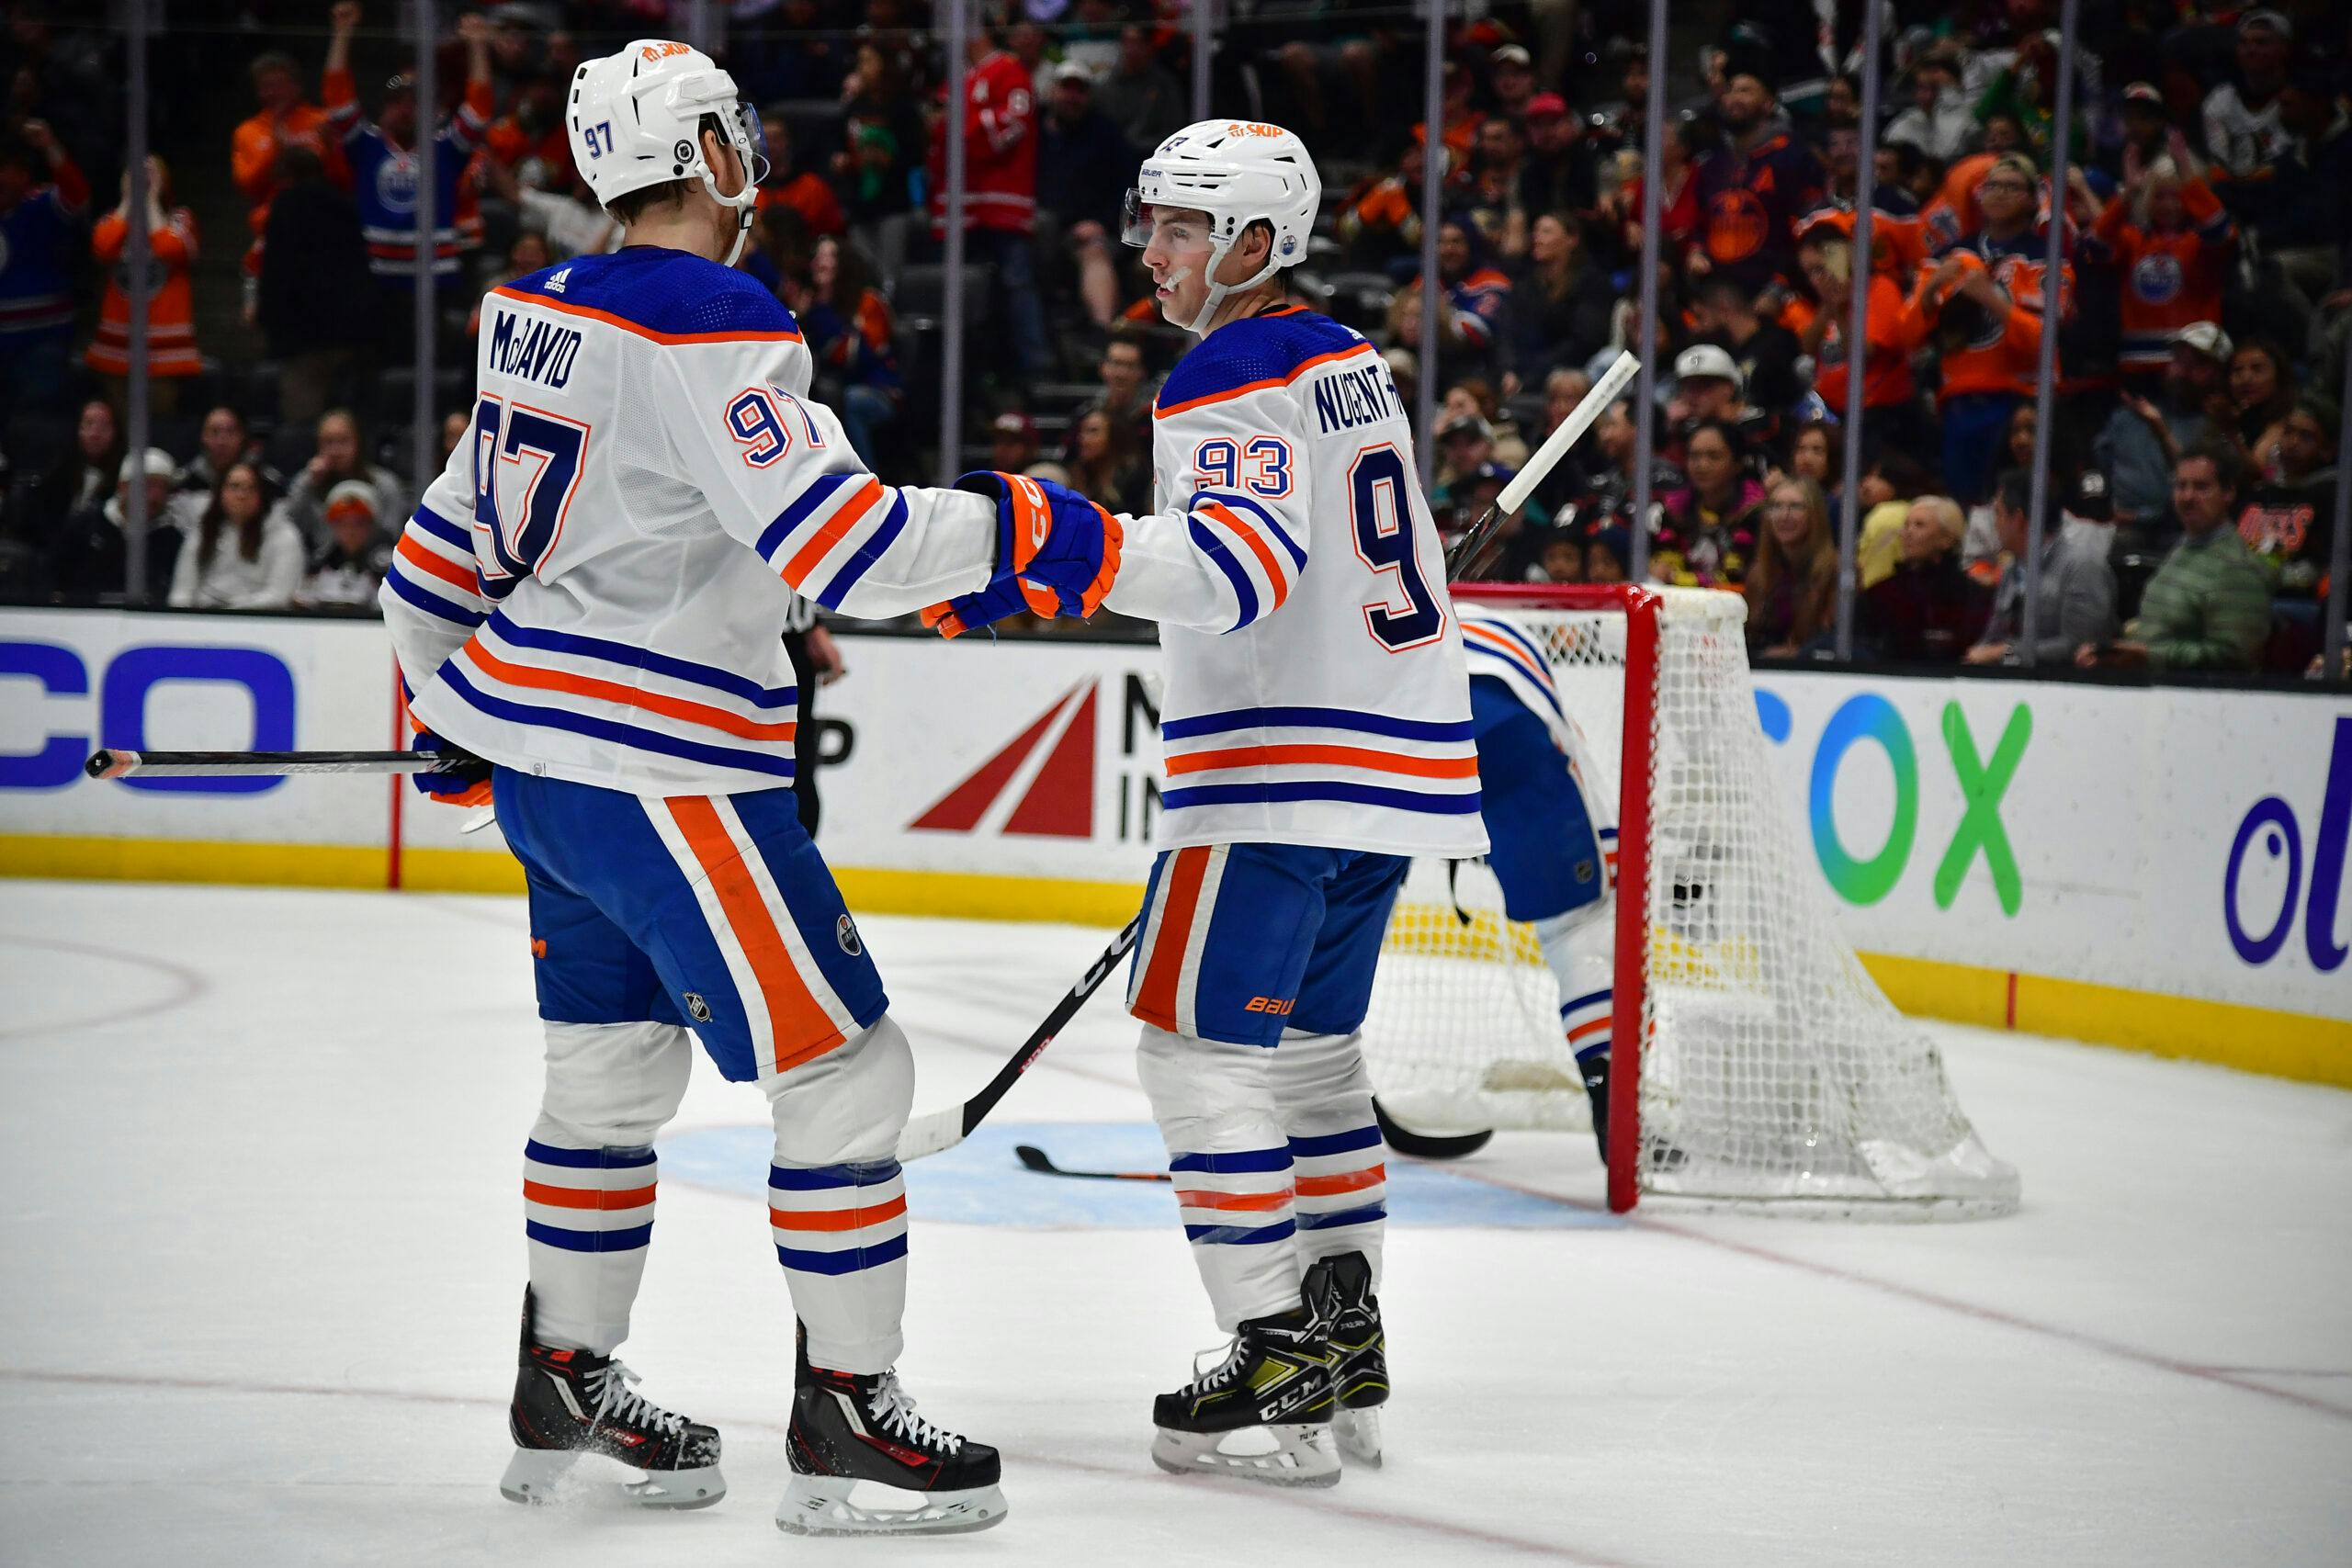 Surging Oilers hand Ducks their 9th straight loss, National Sports